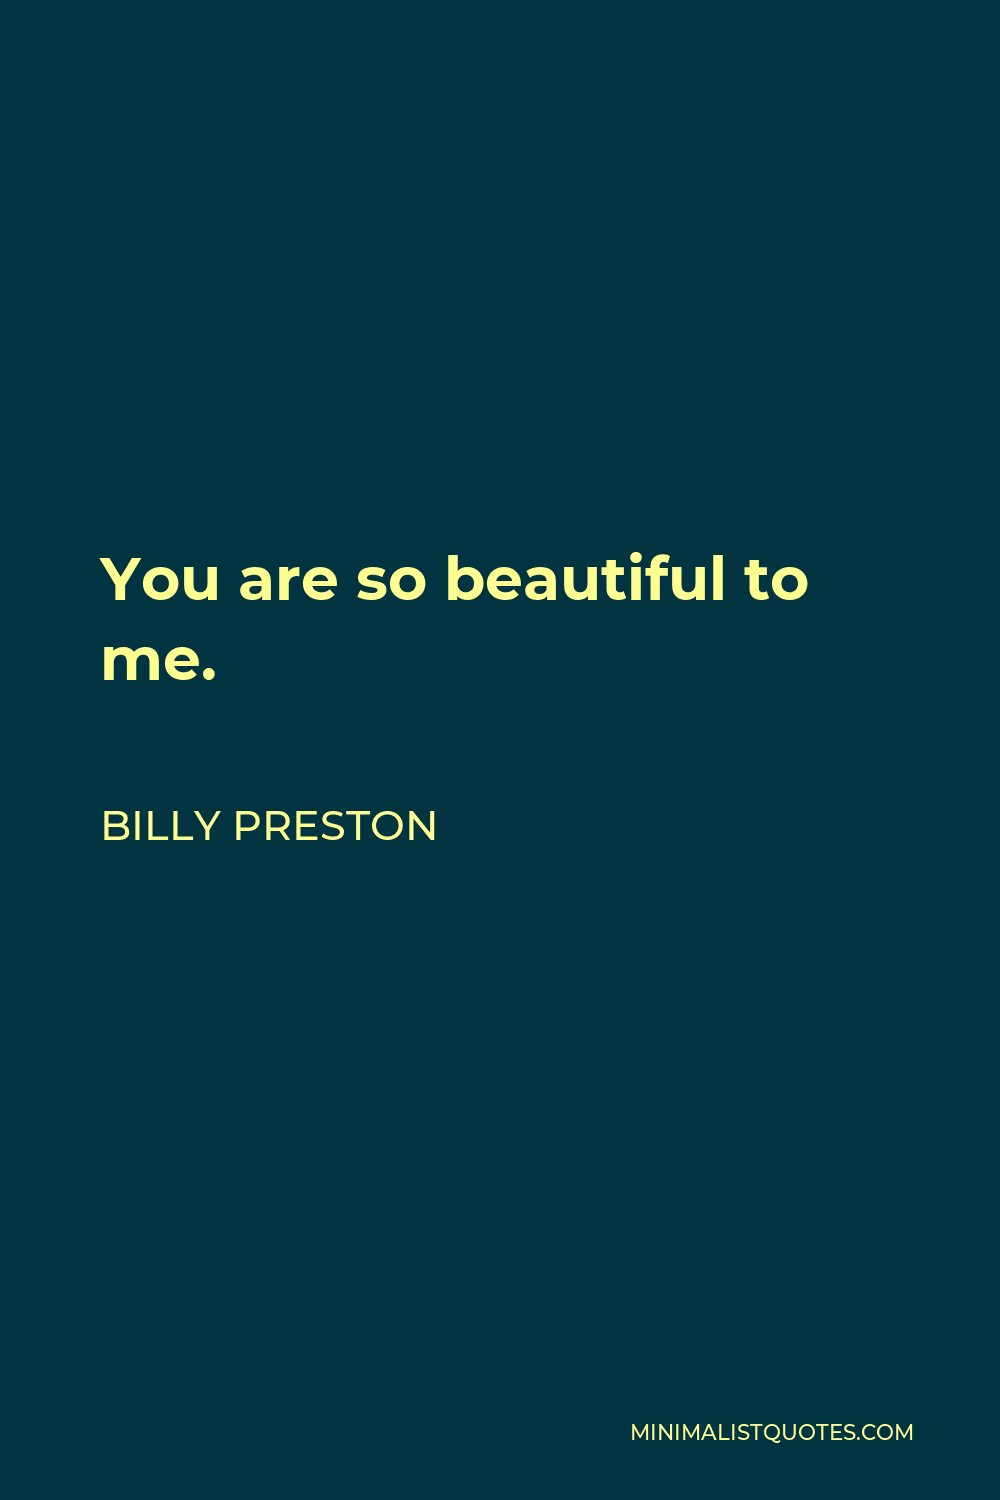 Billy Preston Quote - You are so beautiful to me.